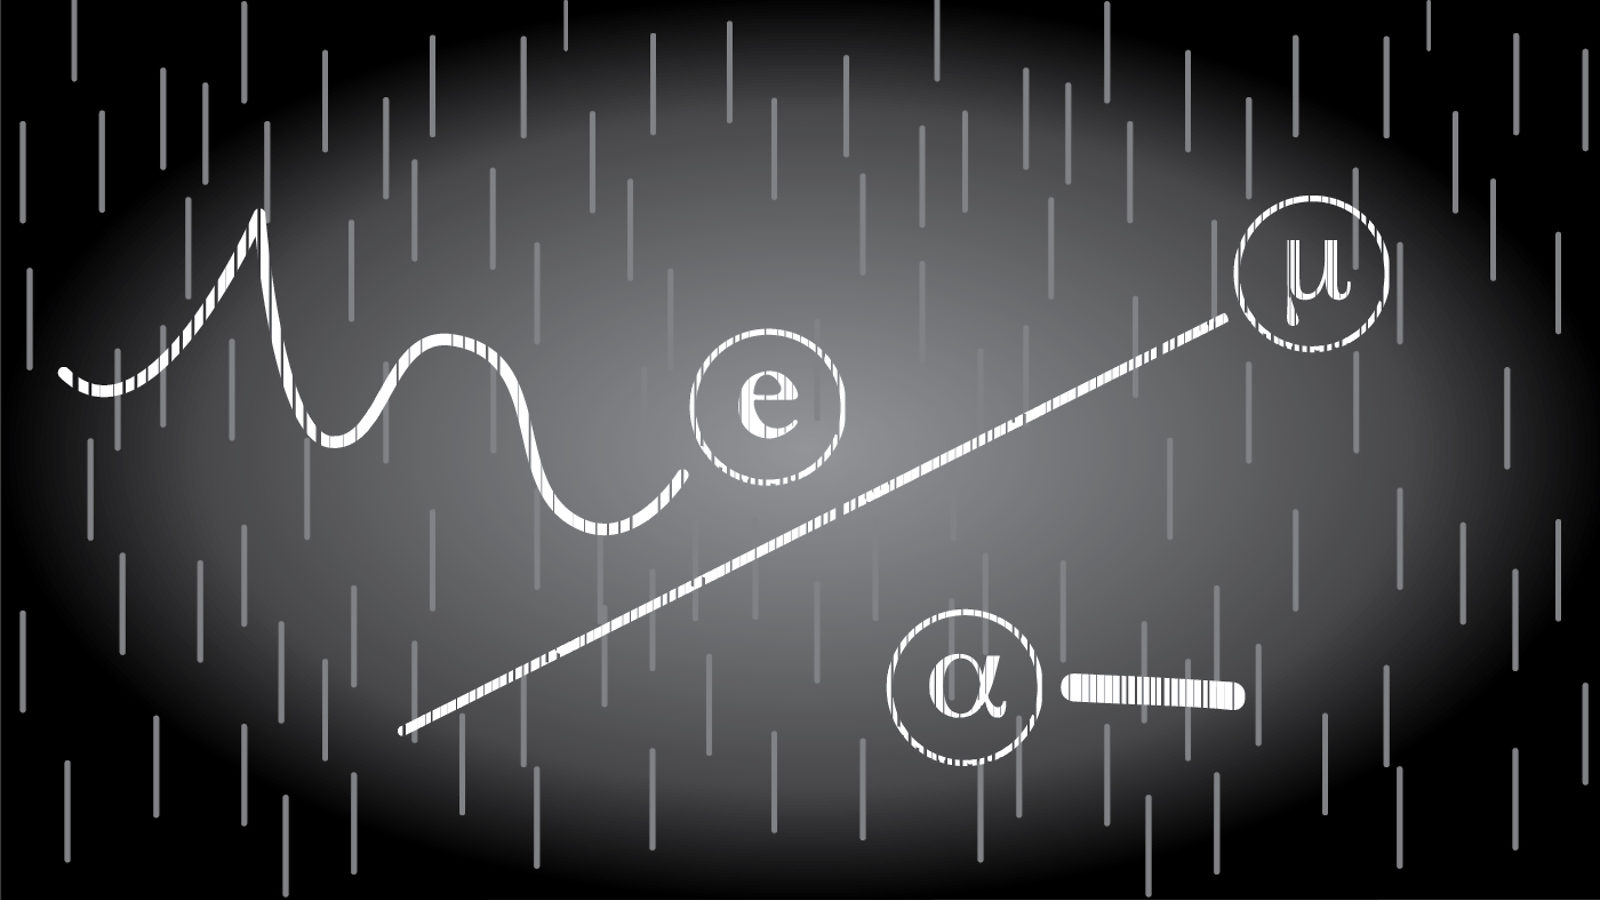 Illustration of Cloud Chamber Particles